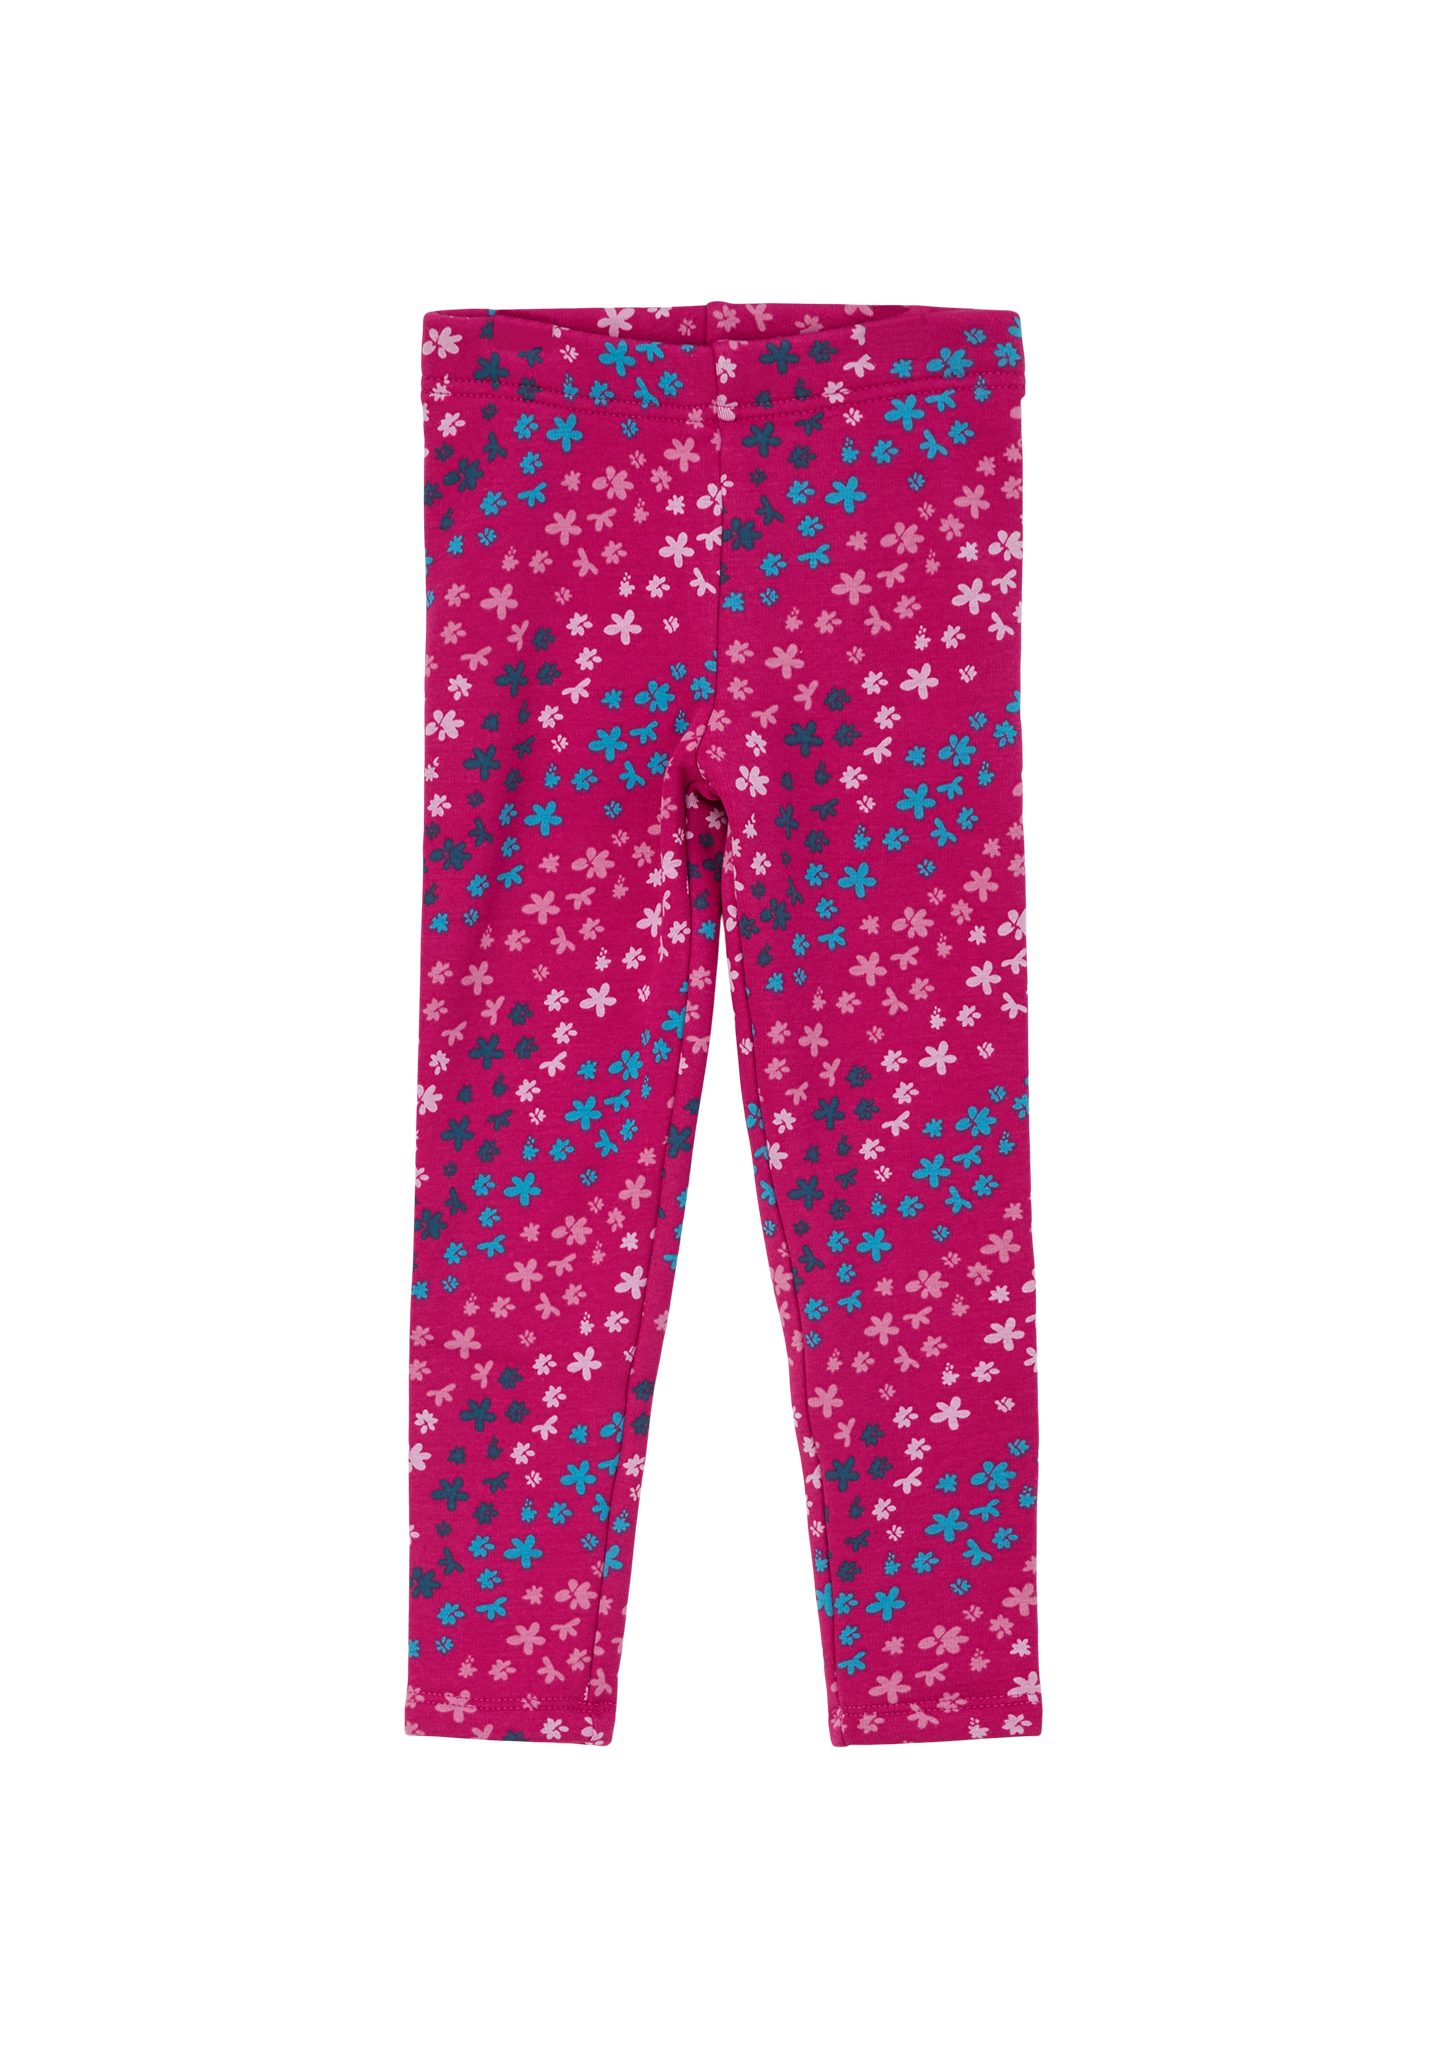 mit Leggings Thermofleece-Futter pink s.Oliver Leggings